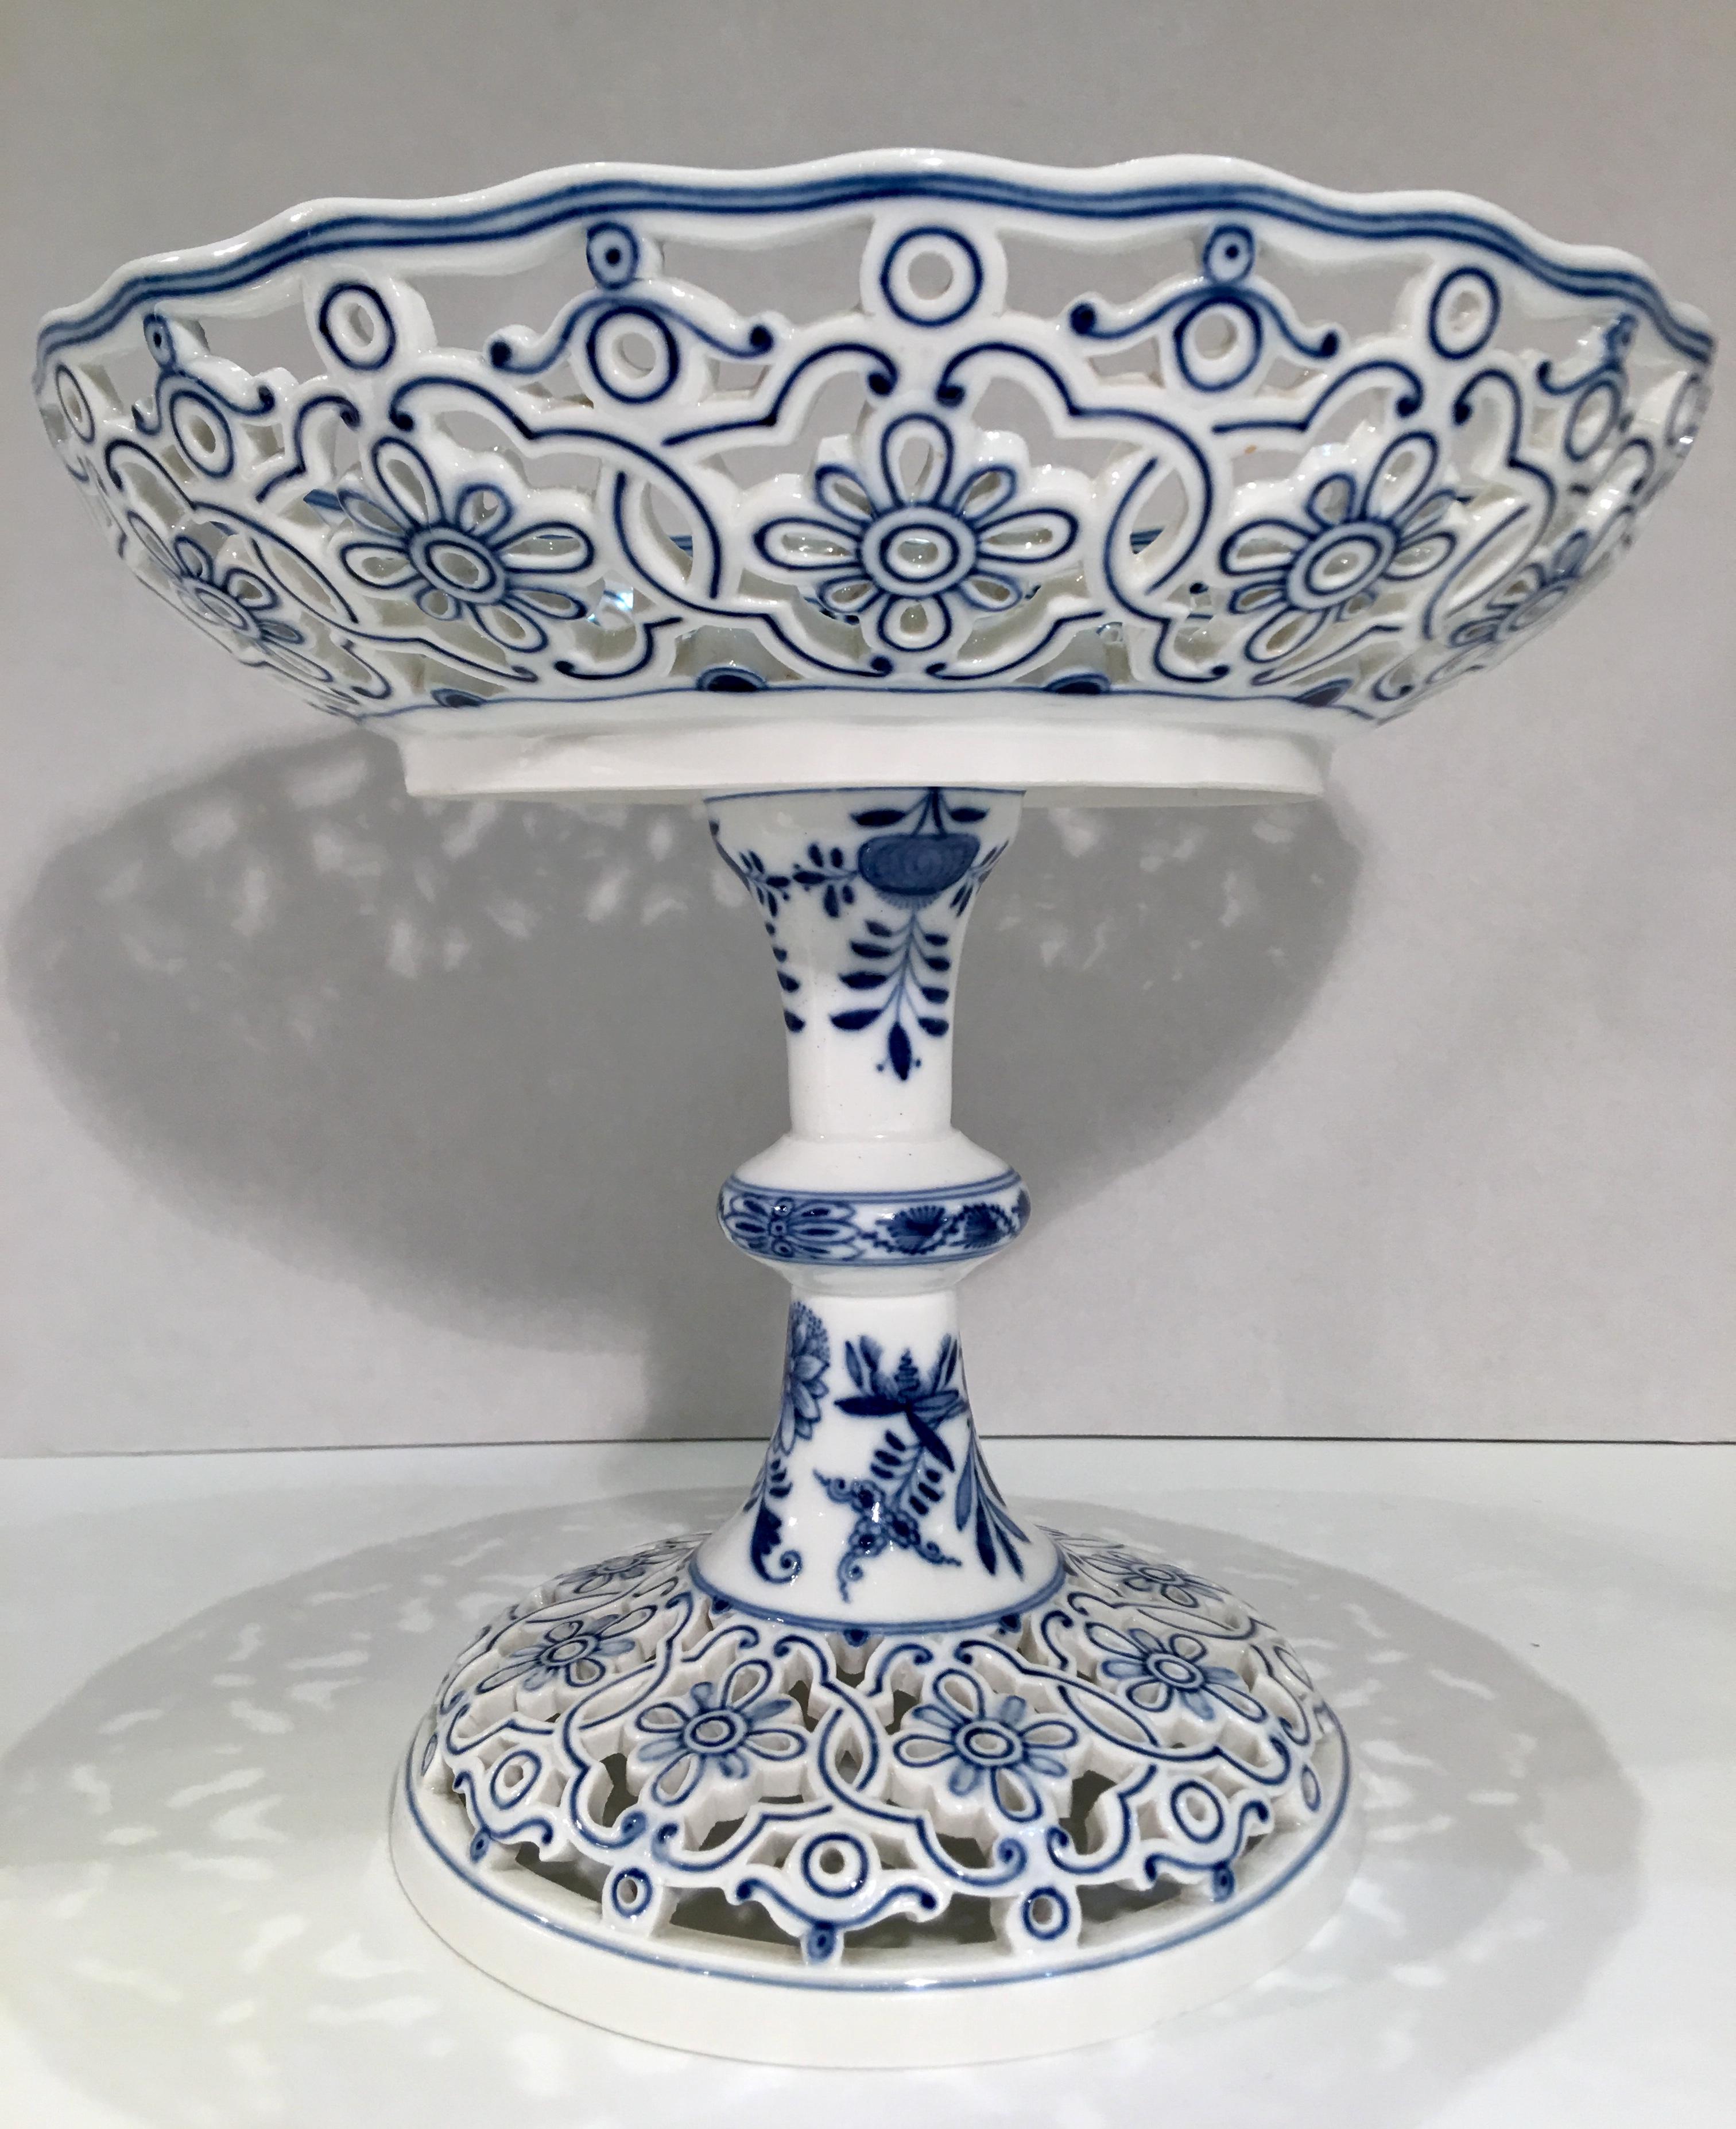 Very fine, elegant antique Meissen handmade and hand painted porcelain, pierced or reticulated, fanciful compote dish from 1815 in the 